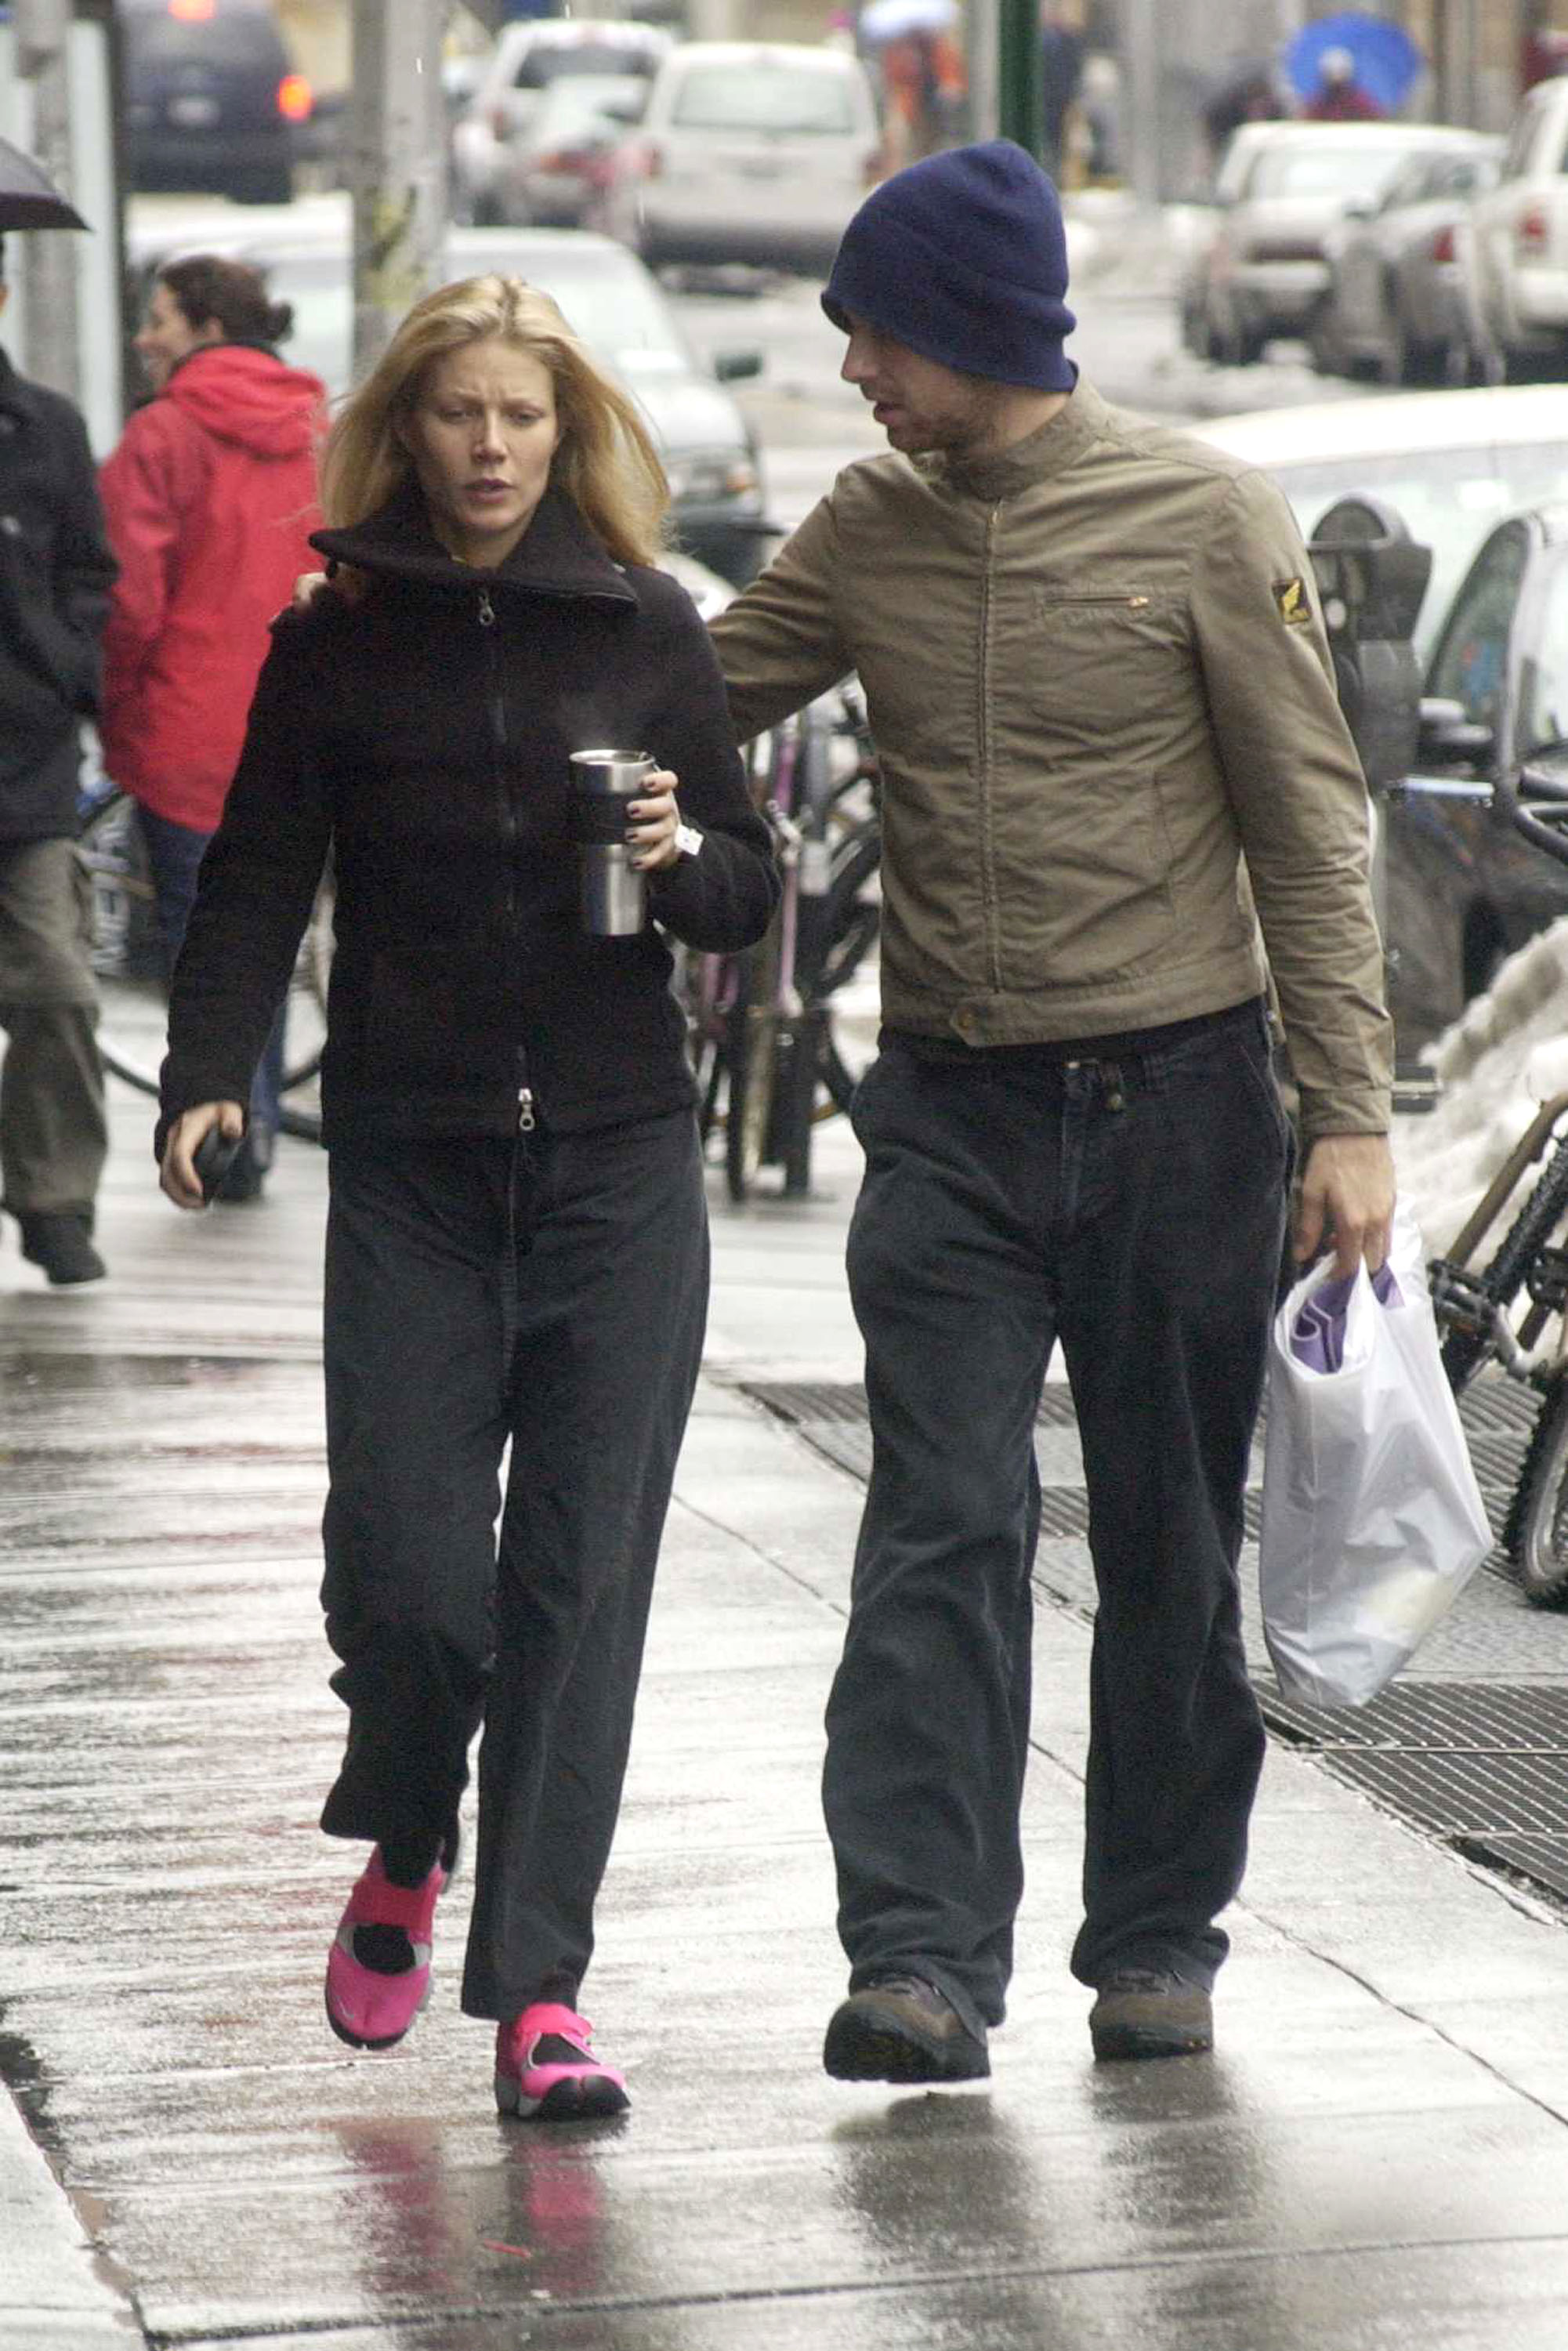 Gwyneth Paltrow and Chris Martin of Coldplay February 23, 2003 in New York City | Source: Getty Images